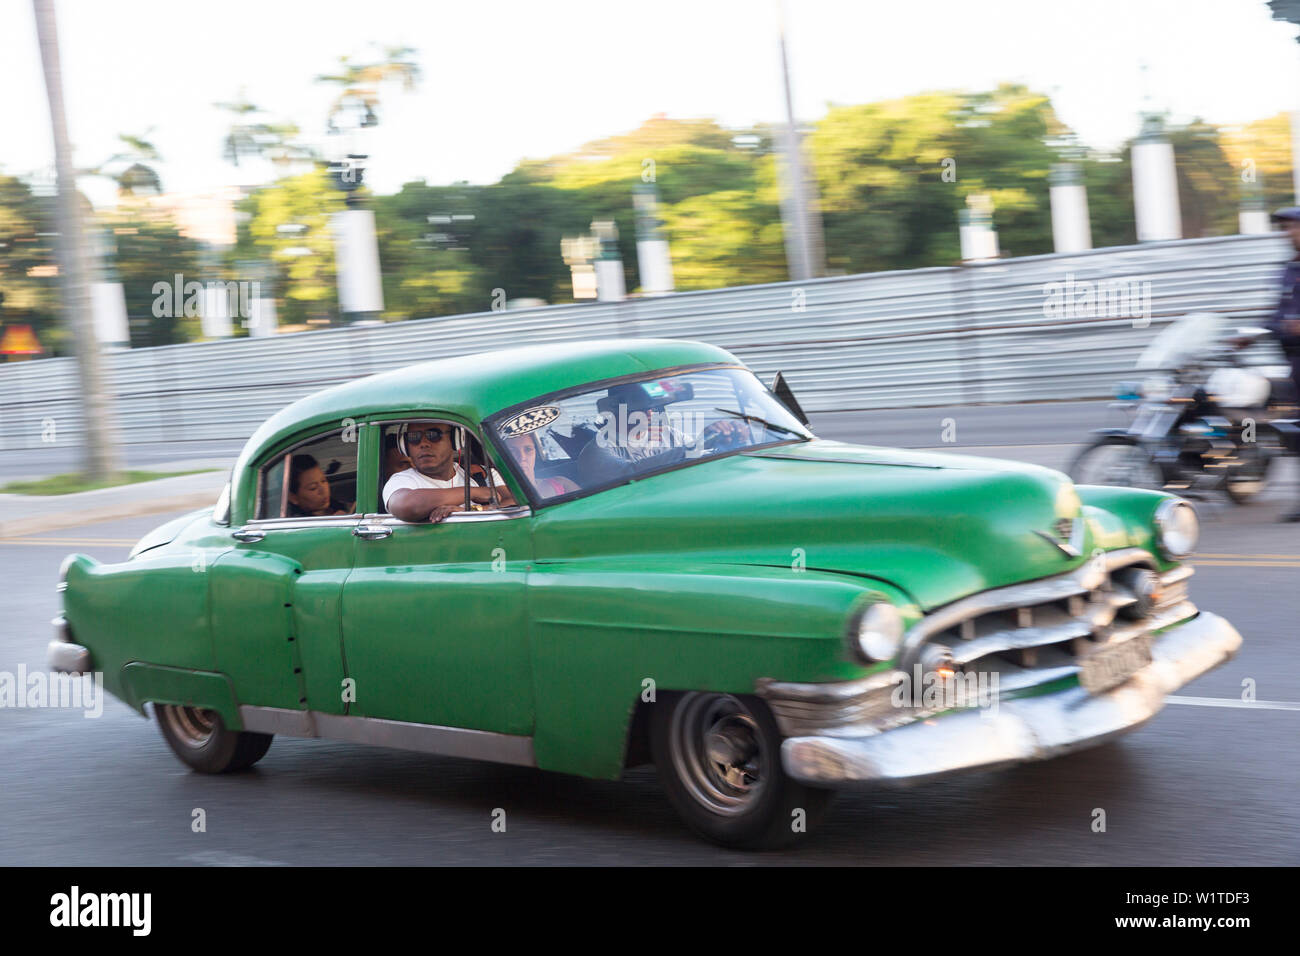 green oldtimer, Capitol, Kapitol, Capitolio, governmental seat, historic town, center, old town, between Habana Vieja and Habana Centro, family travel Stock Photo